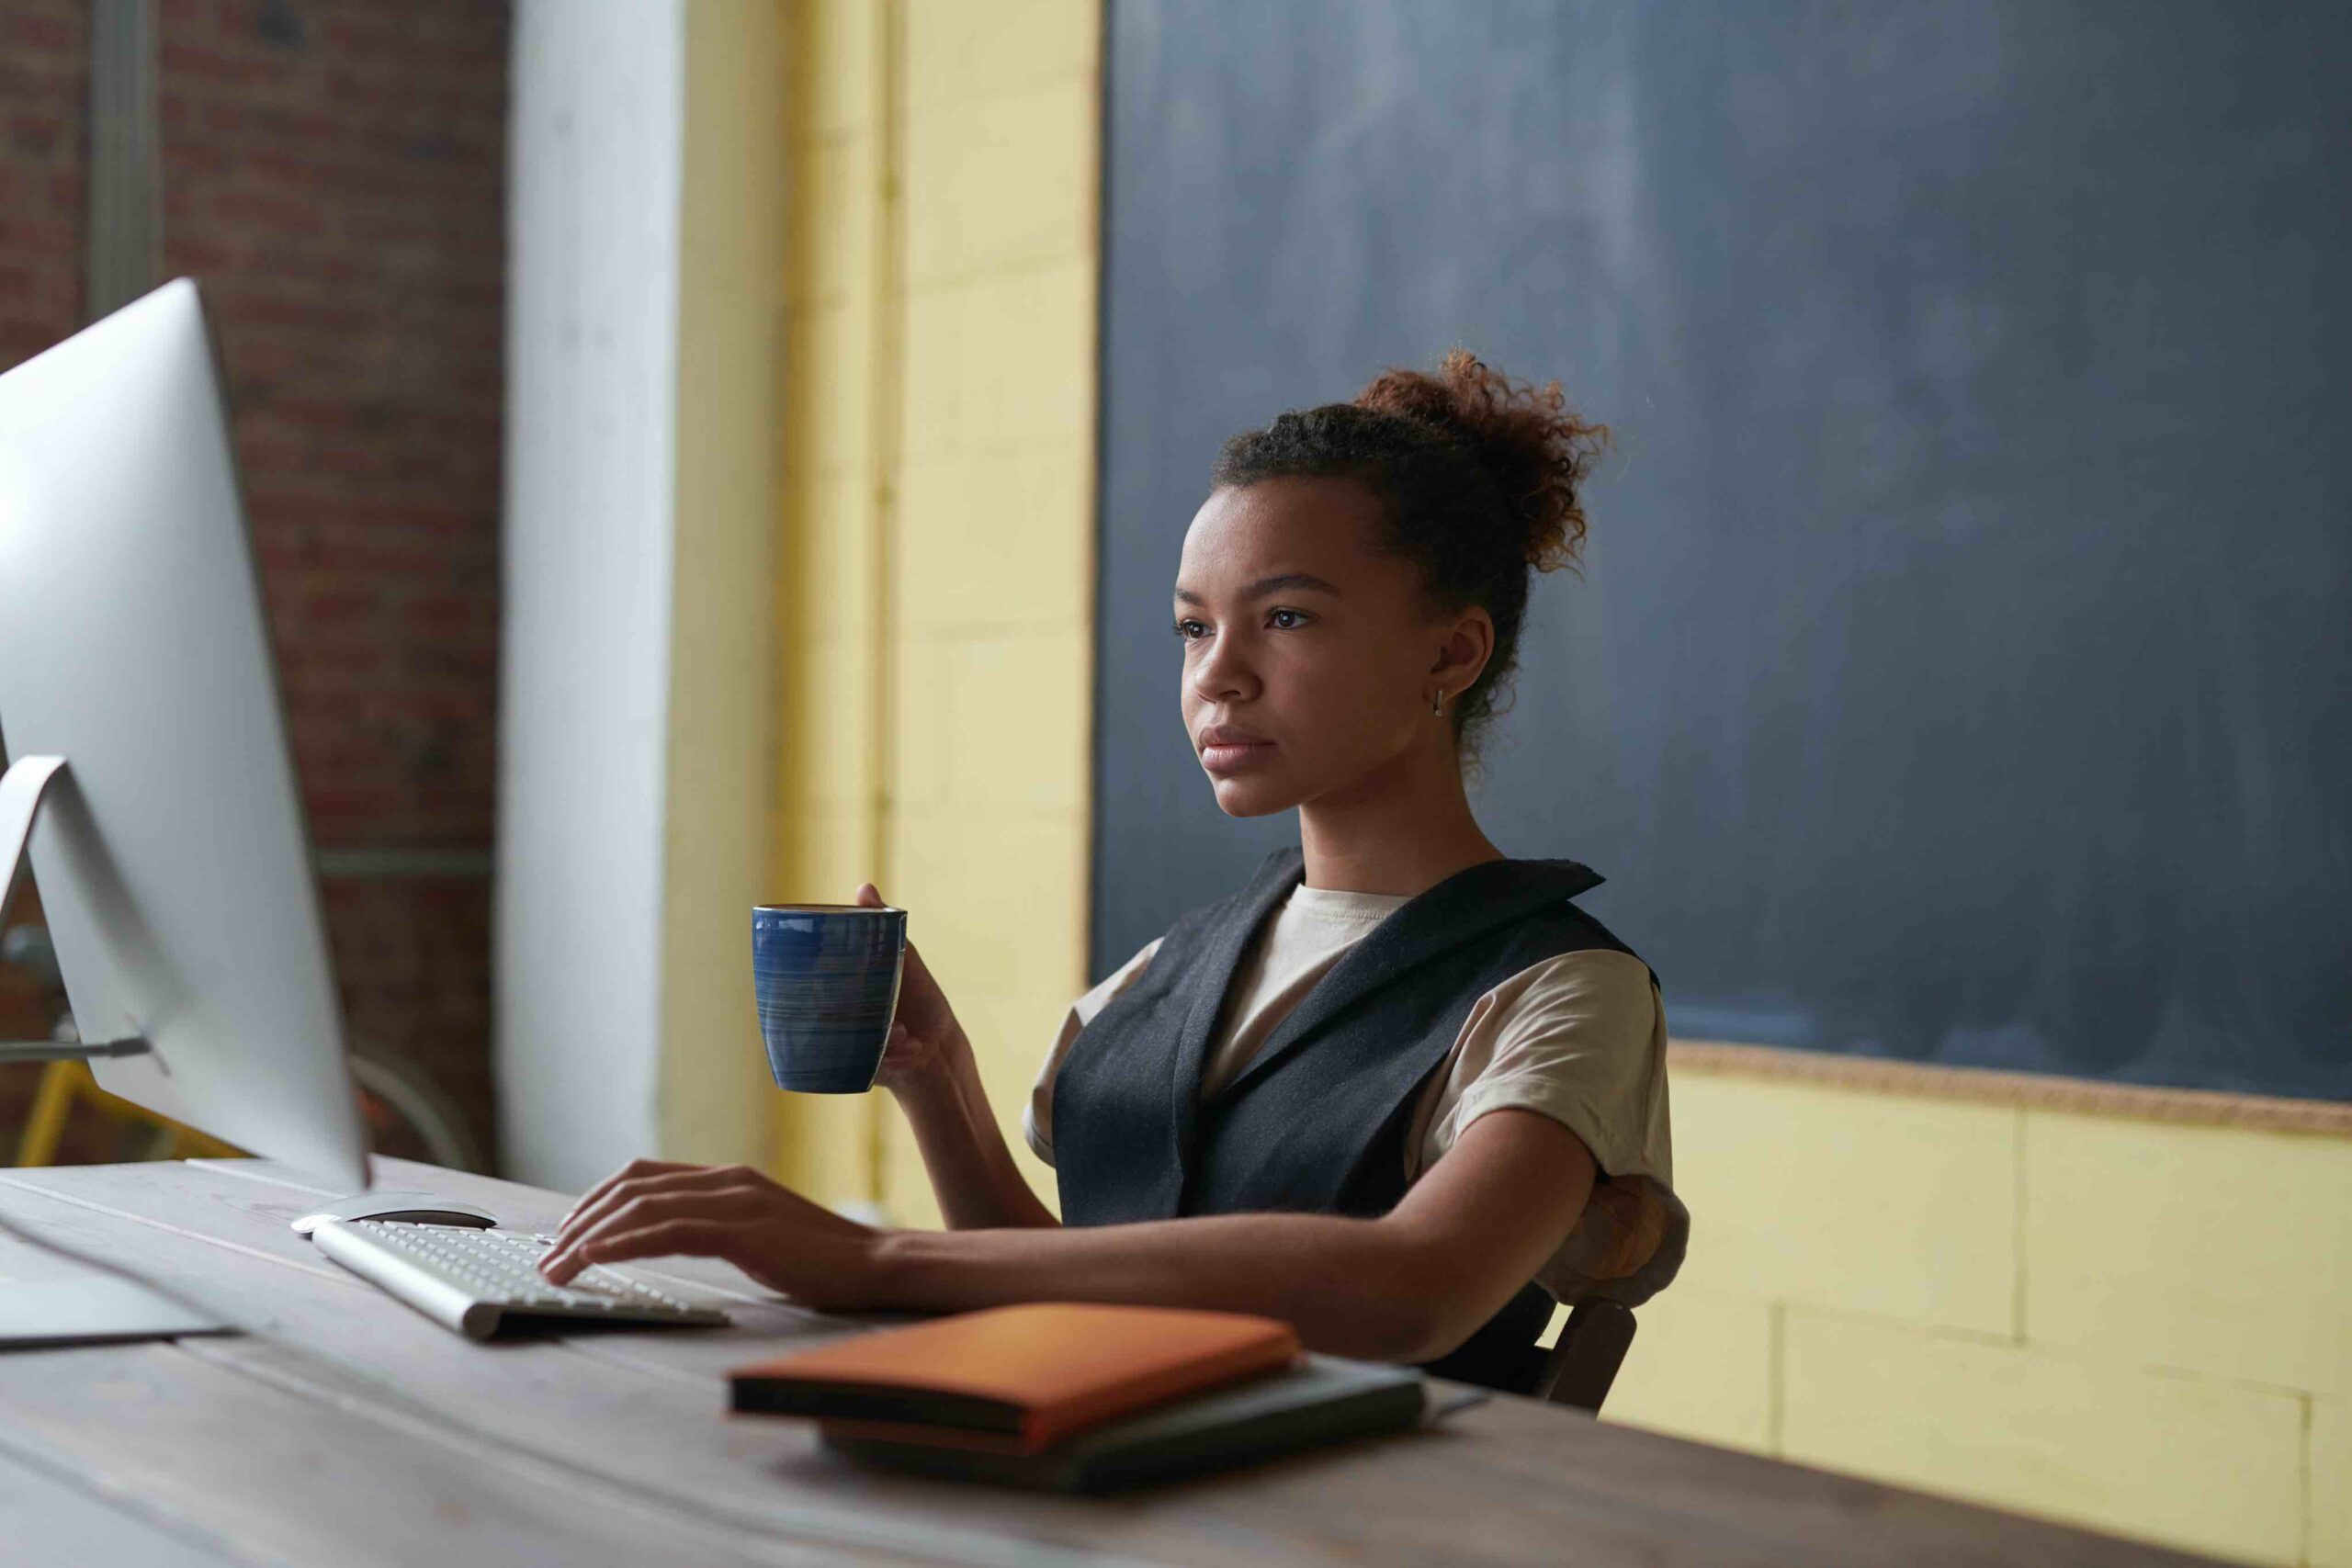 Young teacher at her desk looking at computer while holding cup